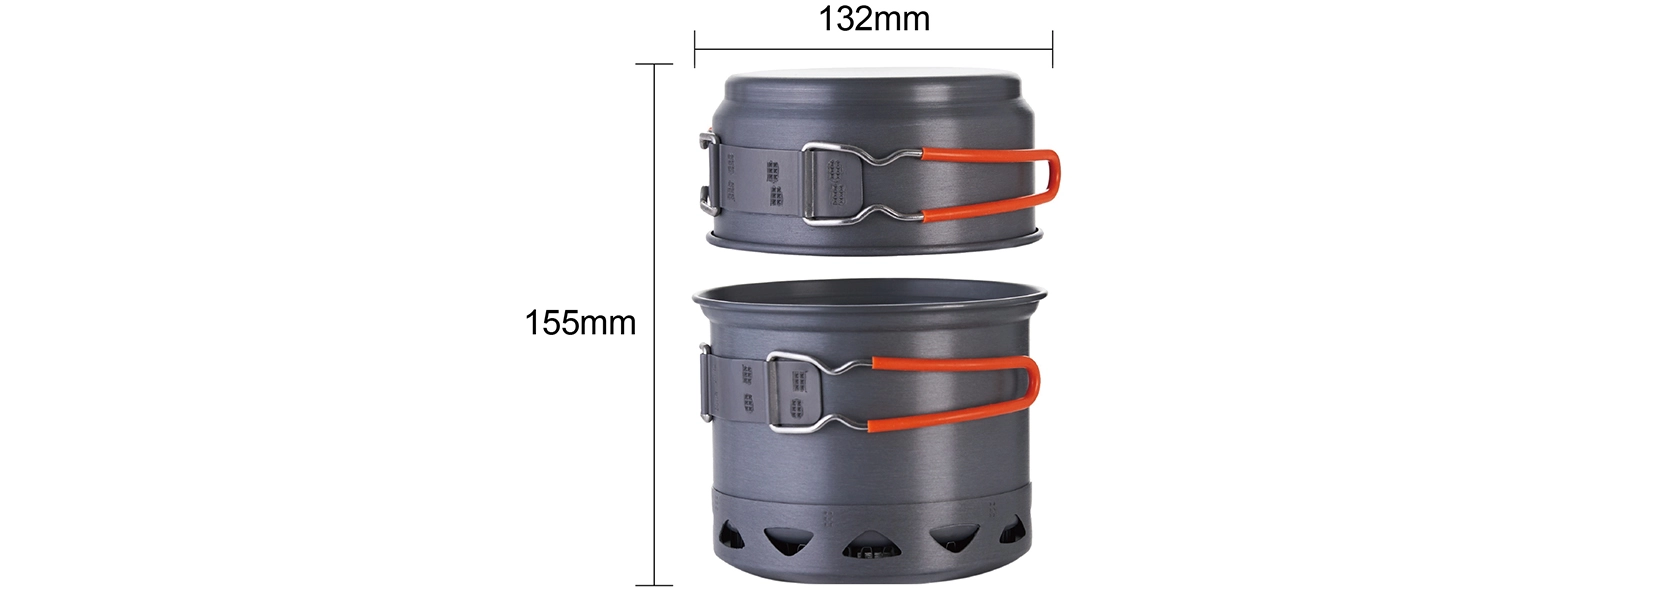 details of Portable Aluminum Cooking Set for Outdoor Fishing